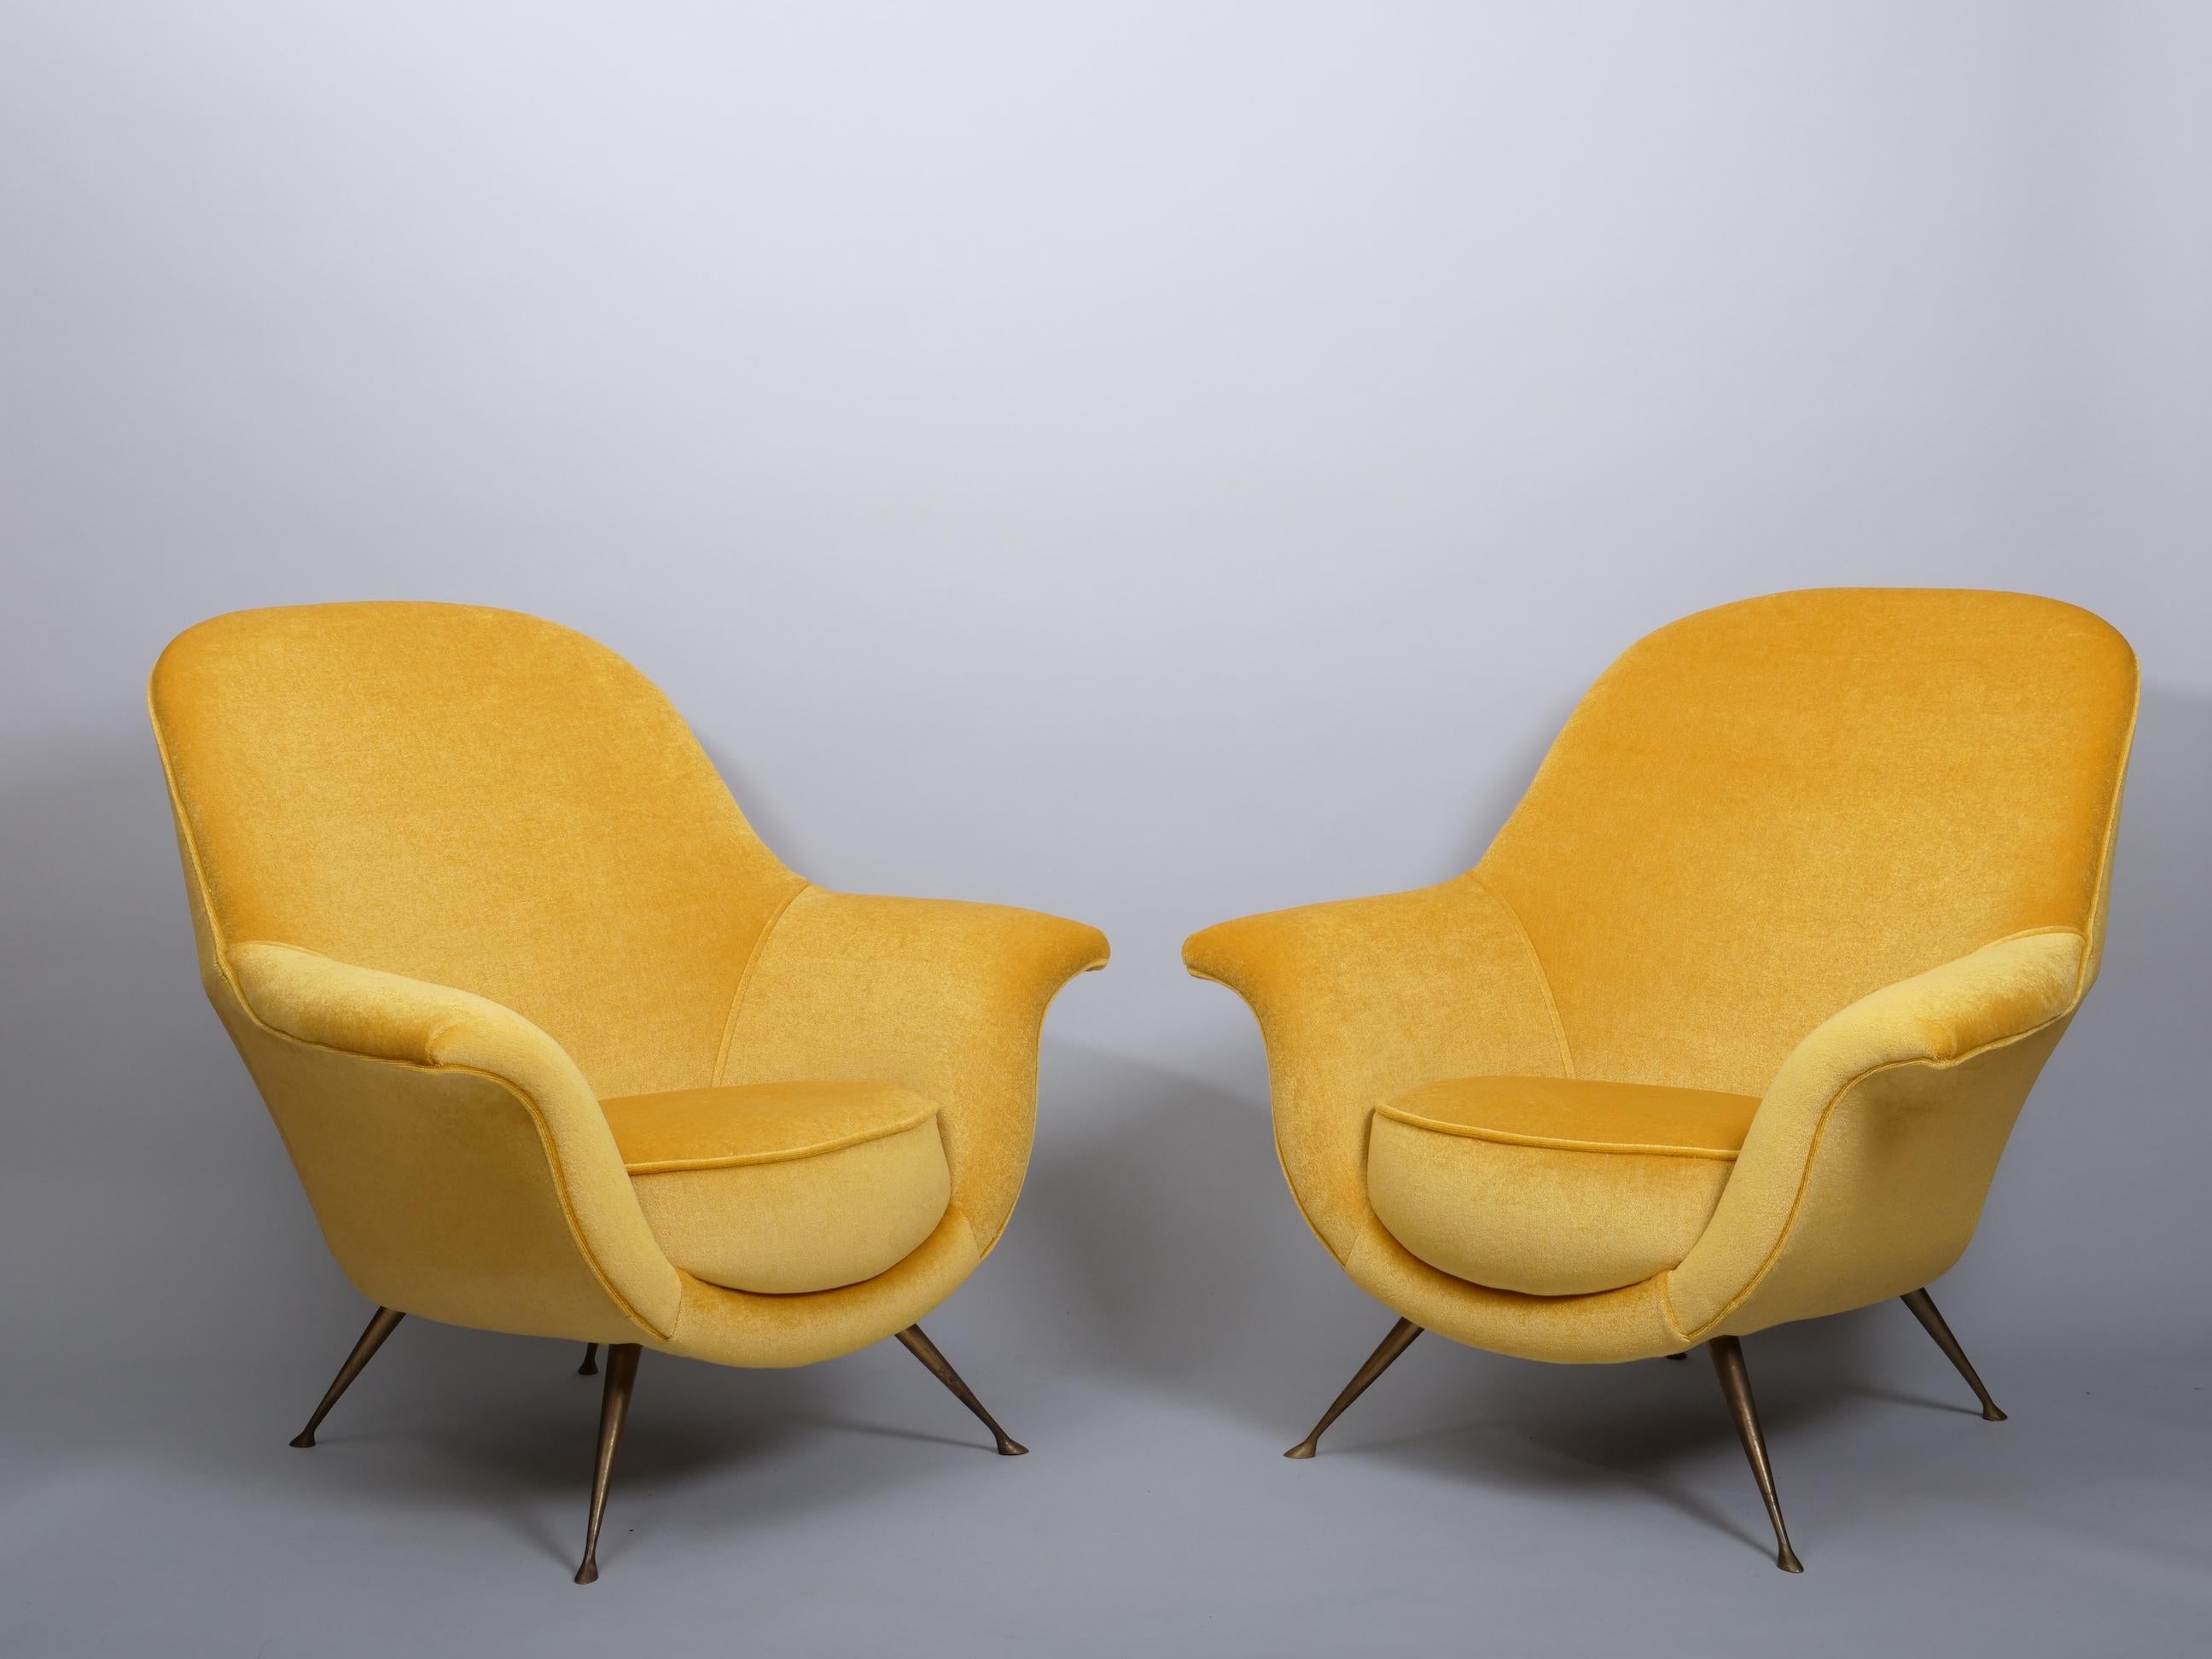 Elegant 1950s Italian midcentury armchairs.

Re upholstered in a gold mohair and silk velvet

Brass legs with patina